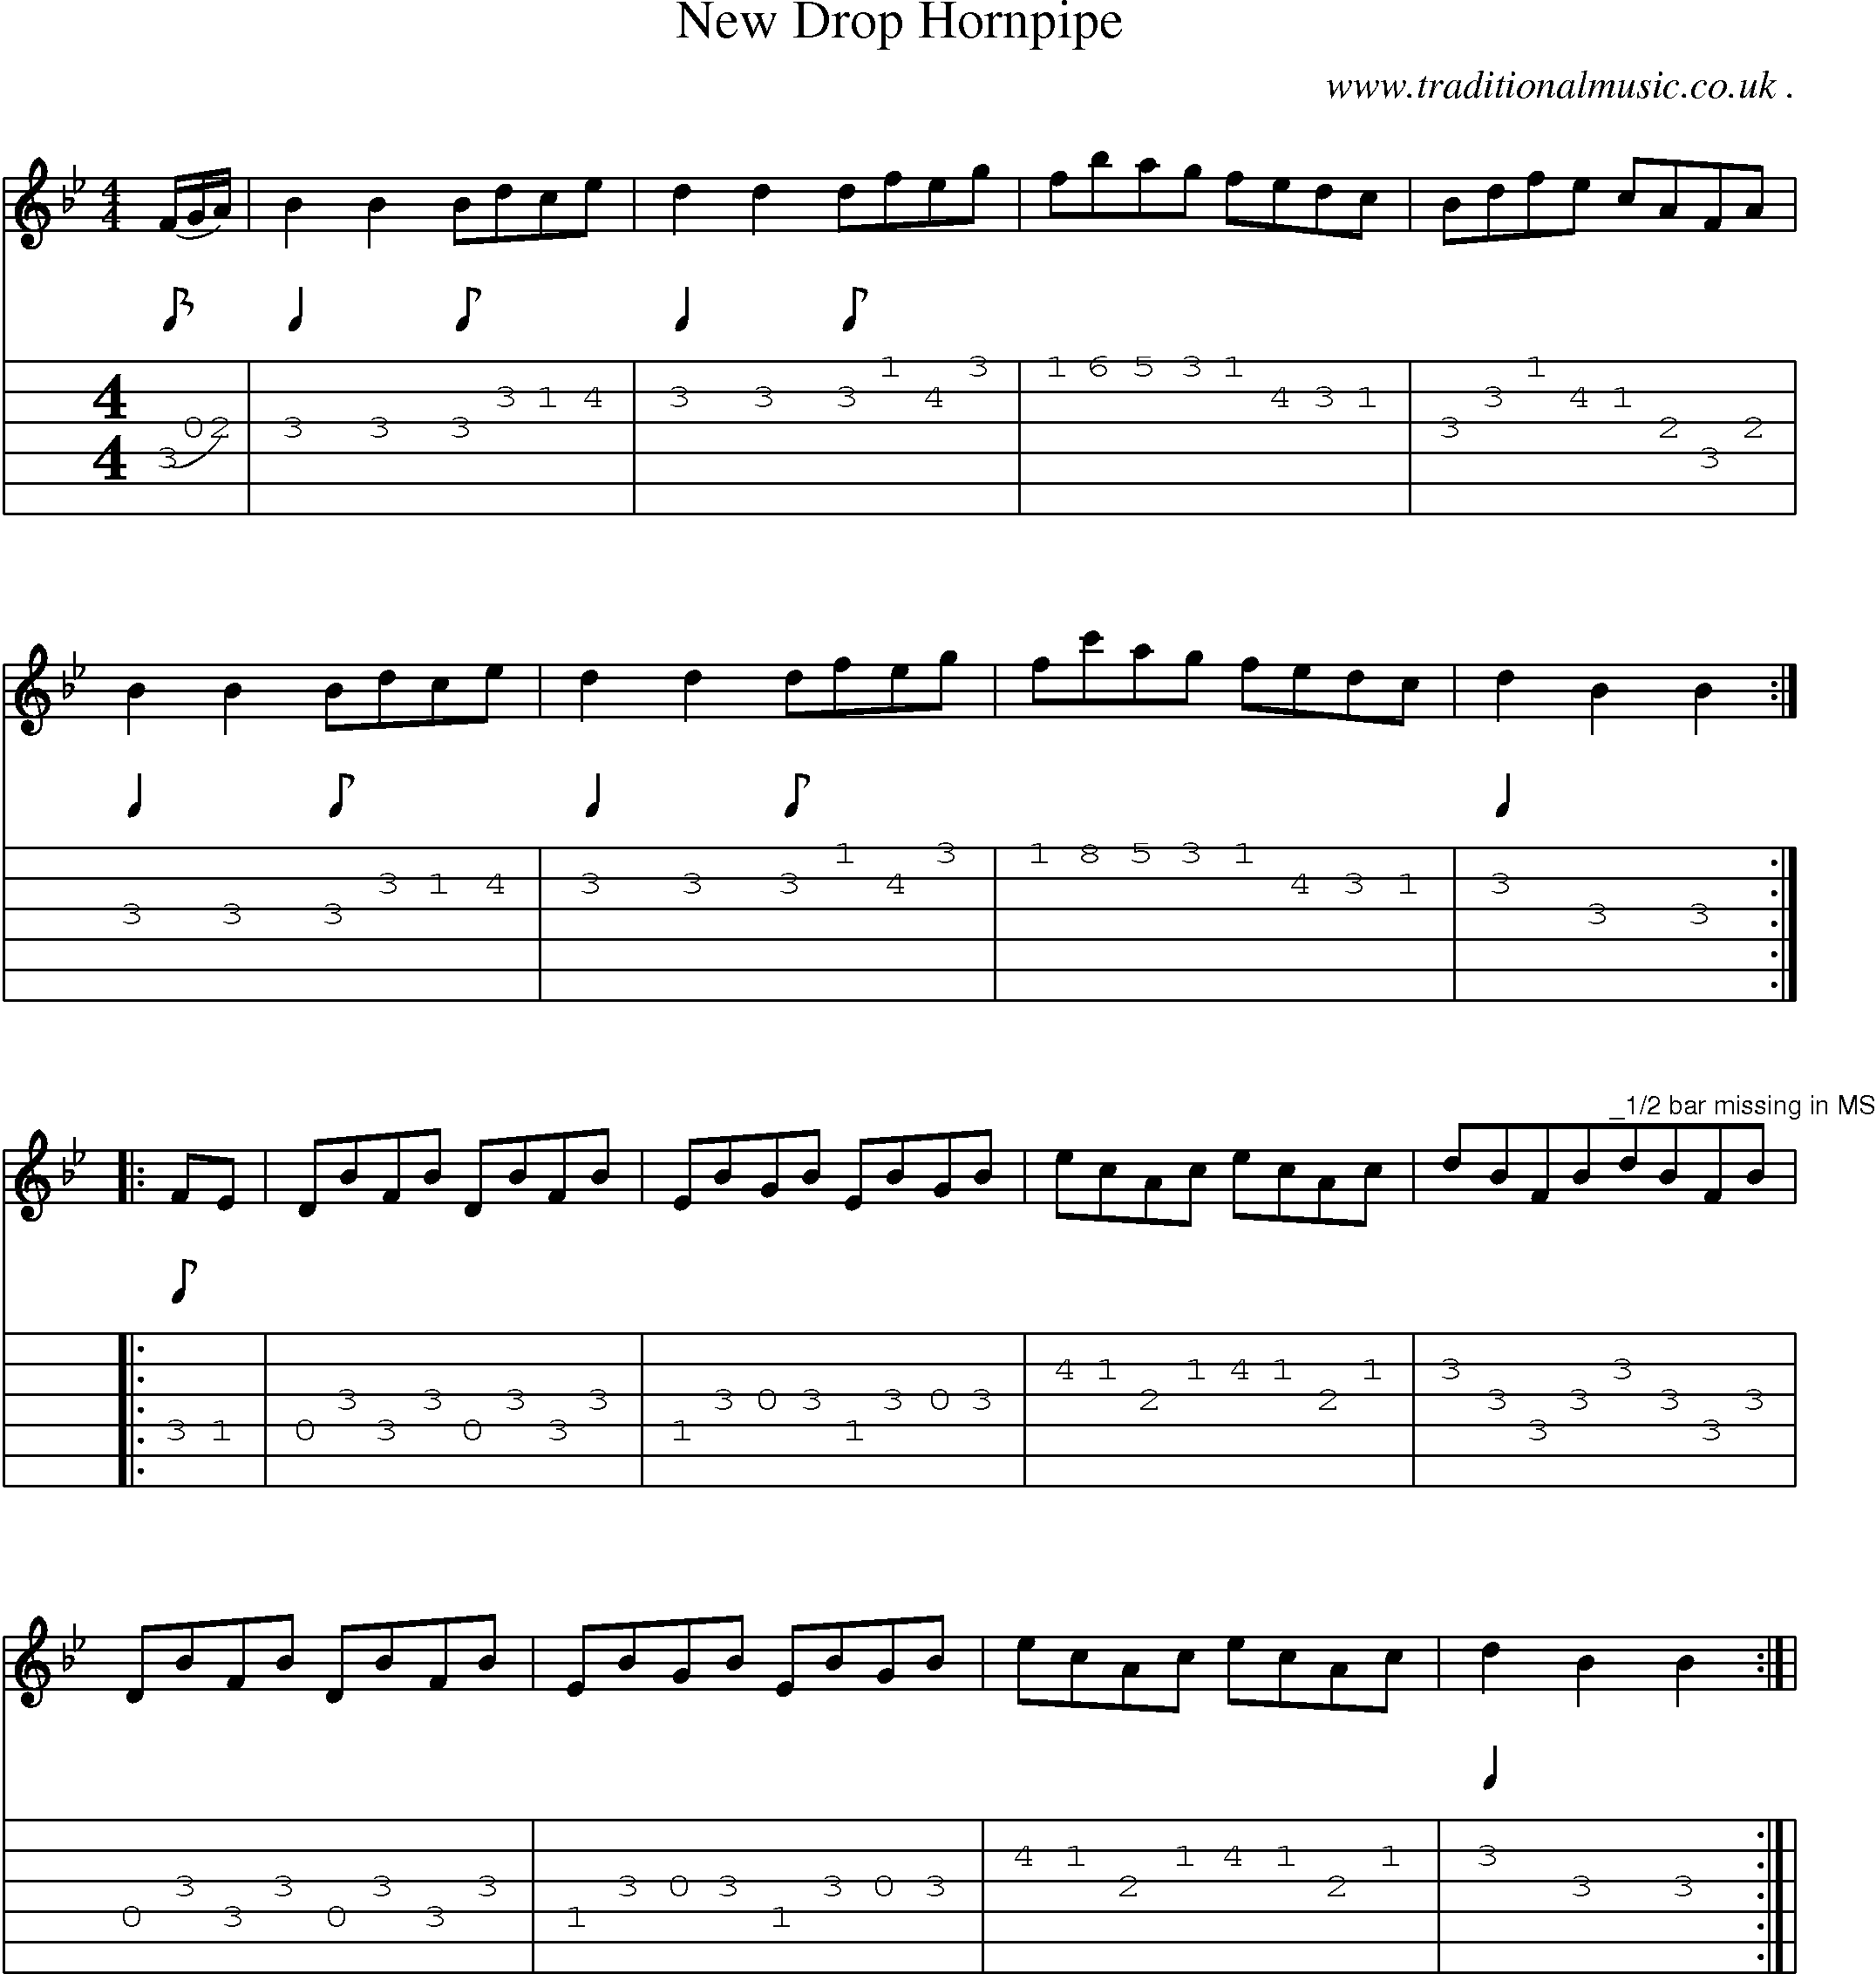 Sheet-Music and Guitar Tabs for New Drop Hornpipe